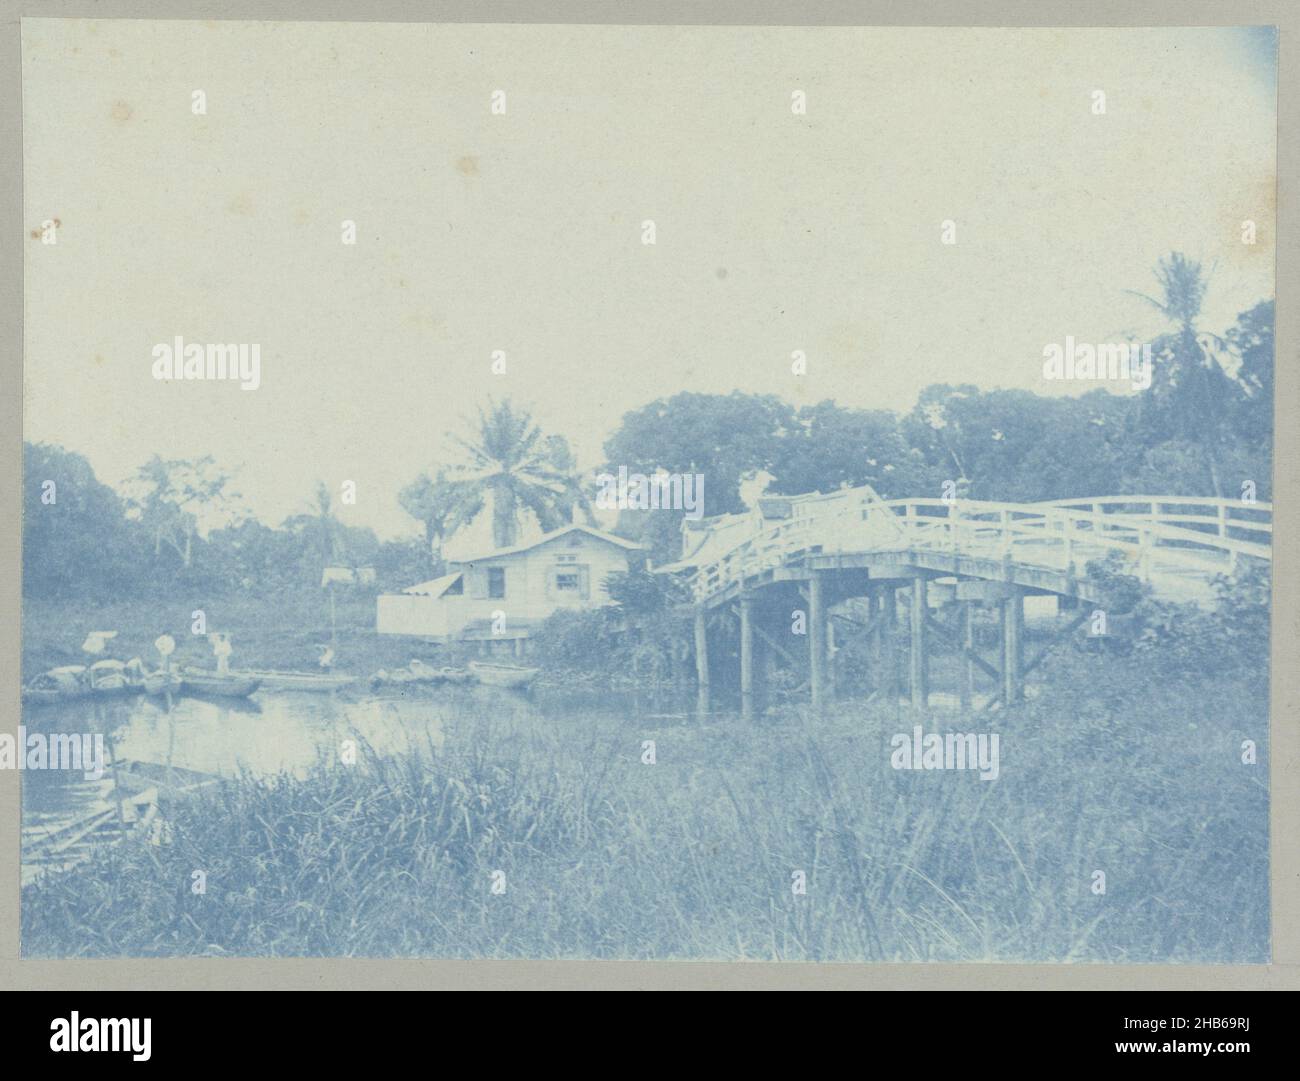 Poelepantje (title on object), The wooden bridge Poelepantje in Paramaribo. Part of the photo album Souvenir de Voyage (part 2), about the life of the Doijer family in and around the plantation Ma Retraite in Suriname in the years 1906-1913., Hendrik Doijer (attributed to), Suriname, 1906 - 1913, photographic support, cyanotype, height 121 mm × width 162 mm Stock Photo